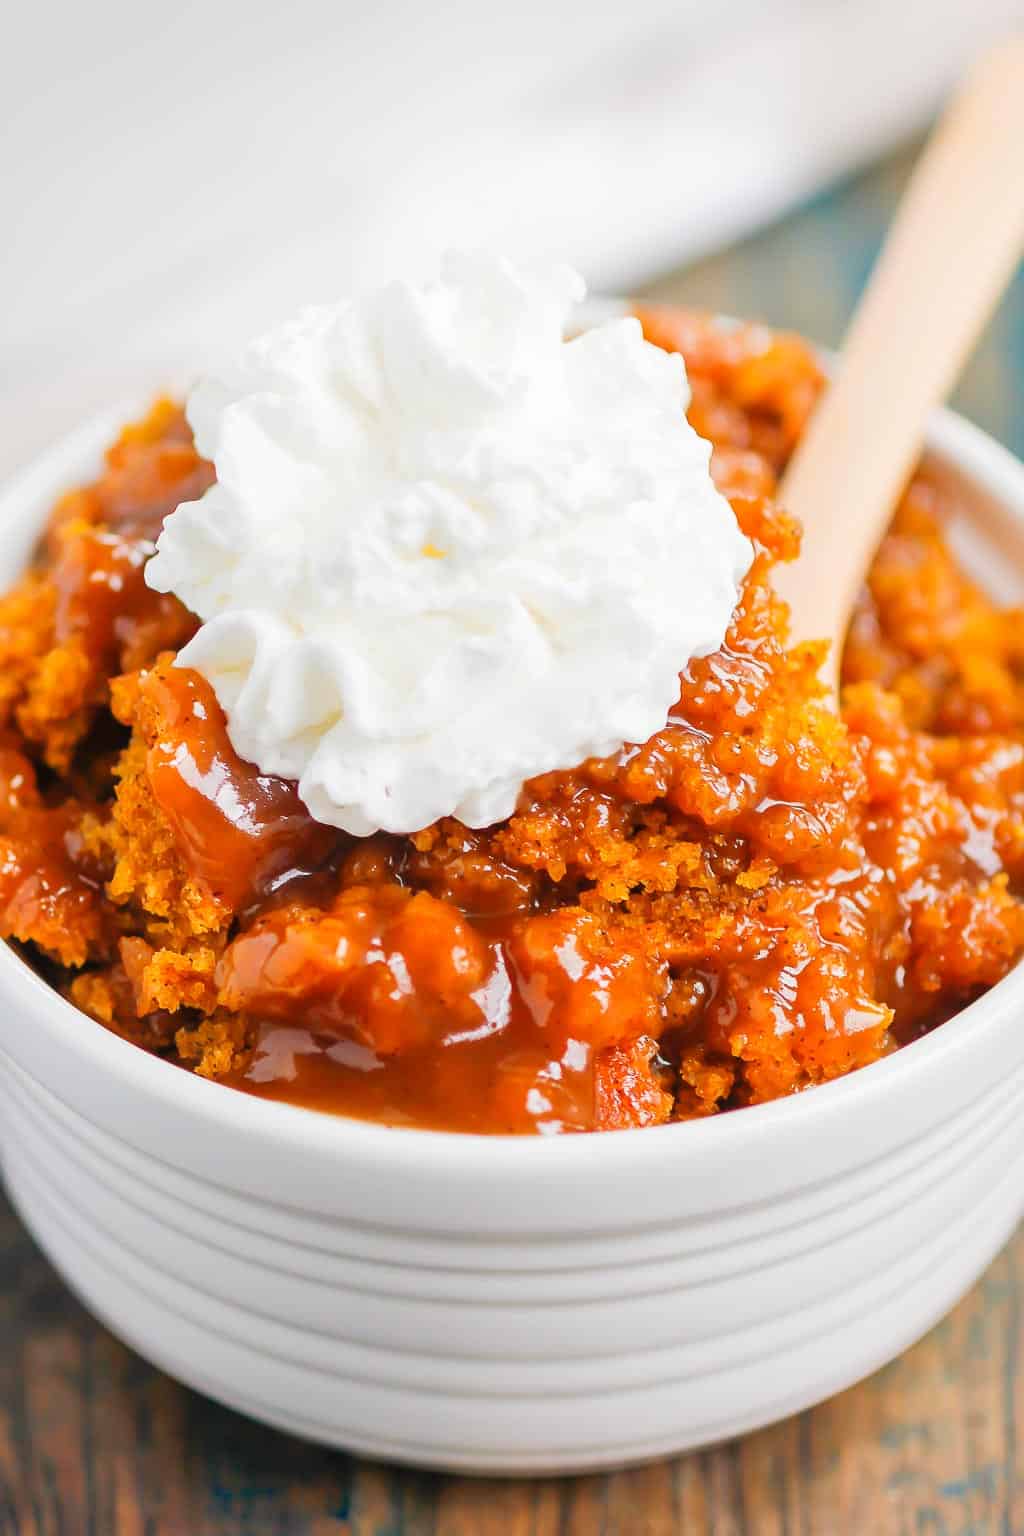 Pumpkin Cobbler is a simple dessert that's bursting with cozy flavors. With a soft, pumpkin cake on top and a decadent, caramel sauce on the bottom, this dish is perfect for fall! #cobbler #pumpkincobbler #cobblerrecipe #pumpkindessert #thanksgivingdessert #falldessert